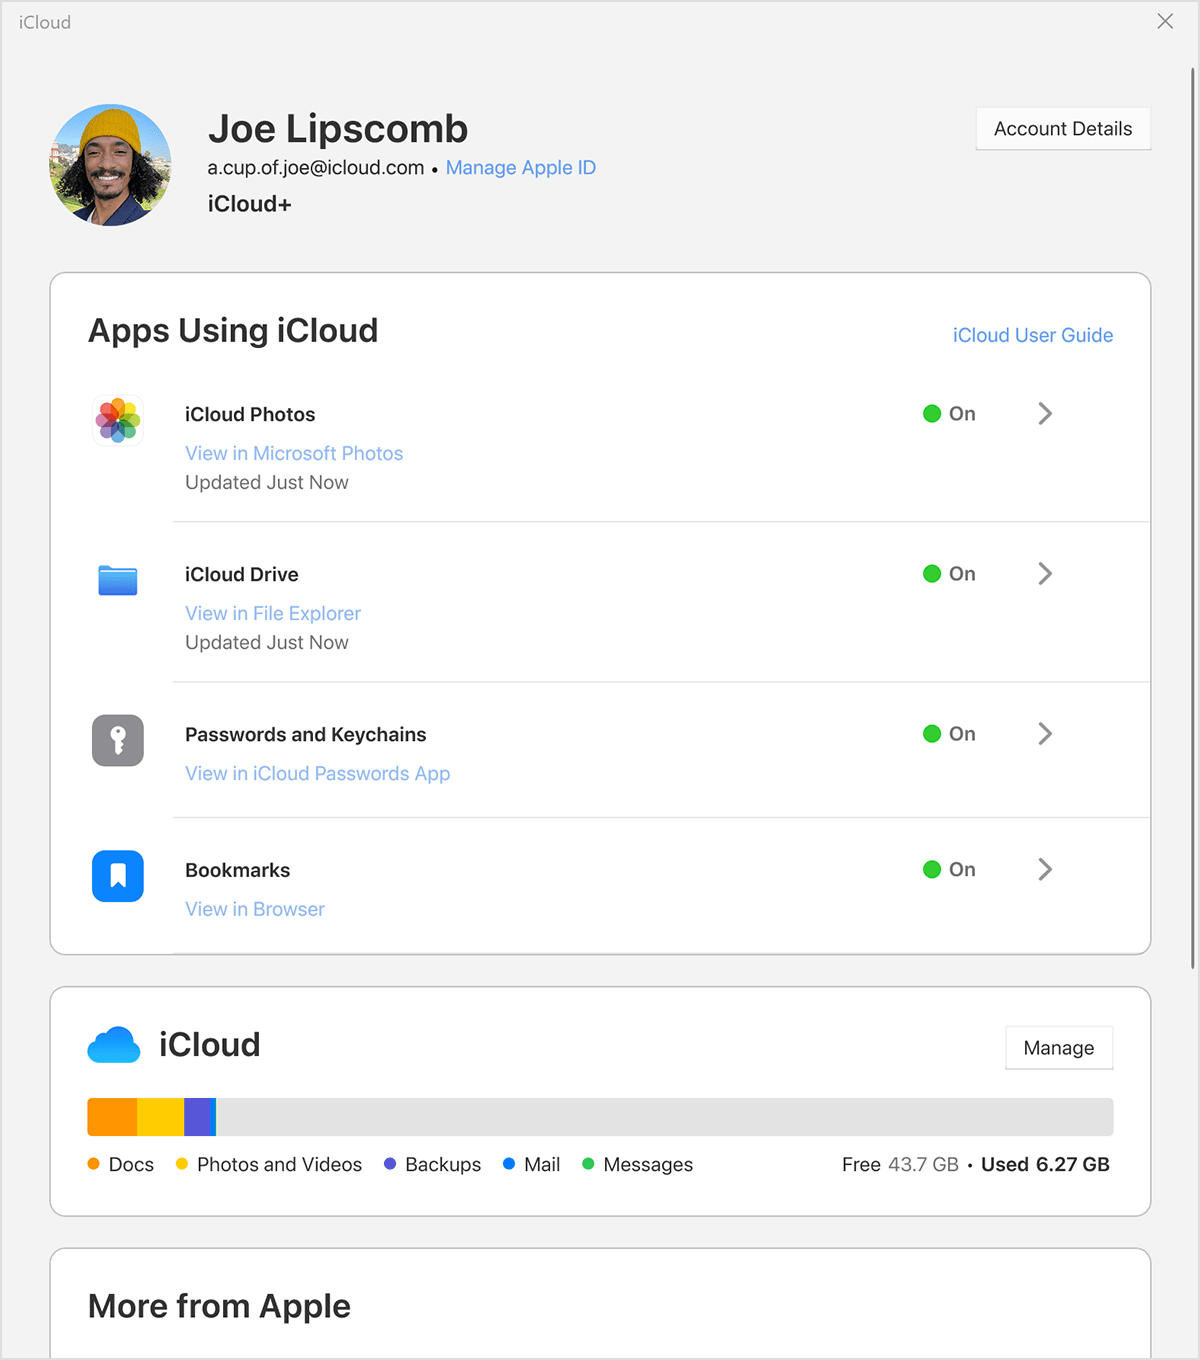 The Manage button is above the graph showing how much iCloud storage you've used.